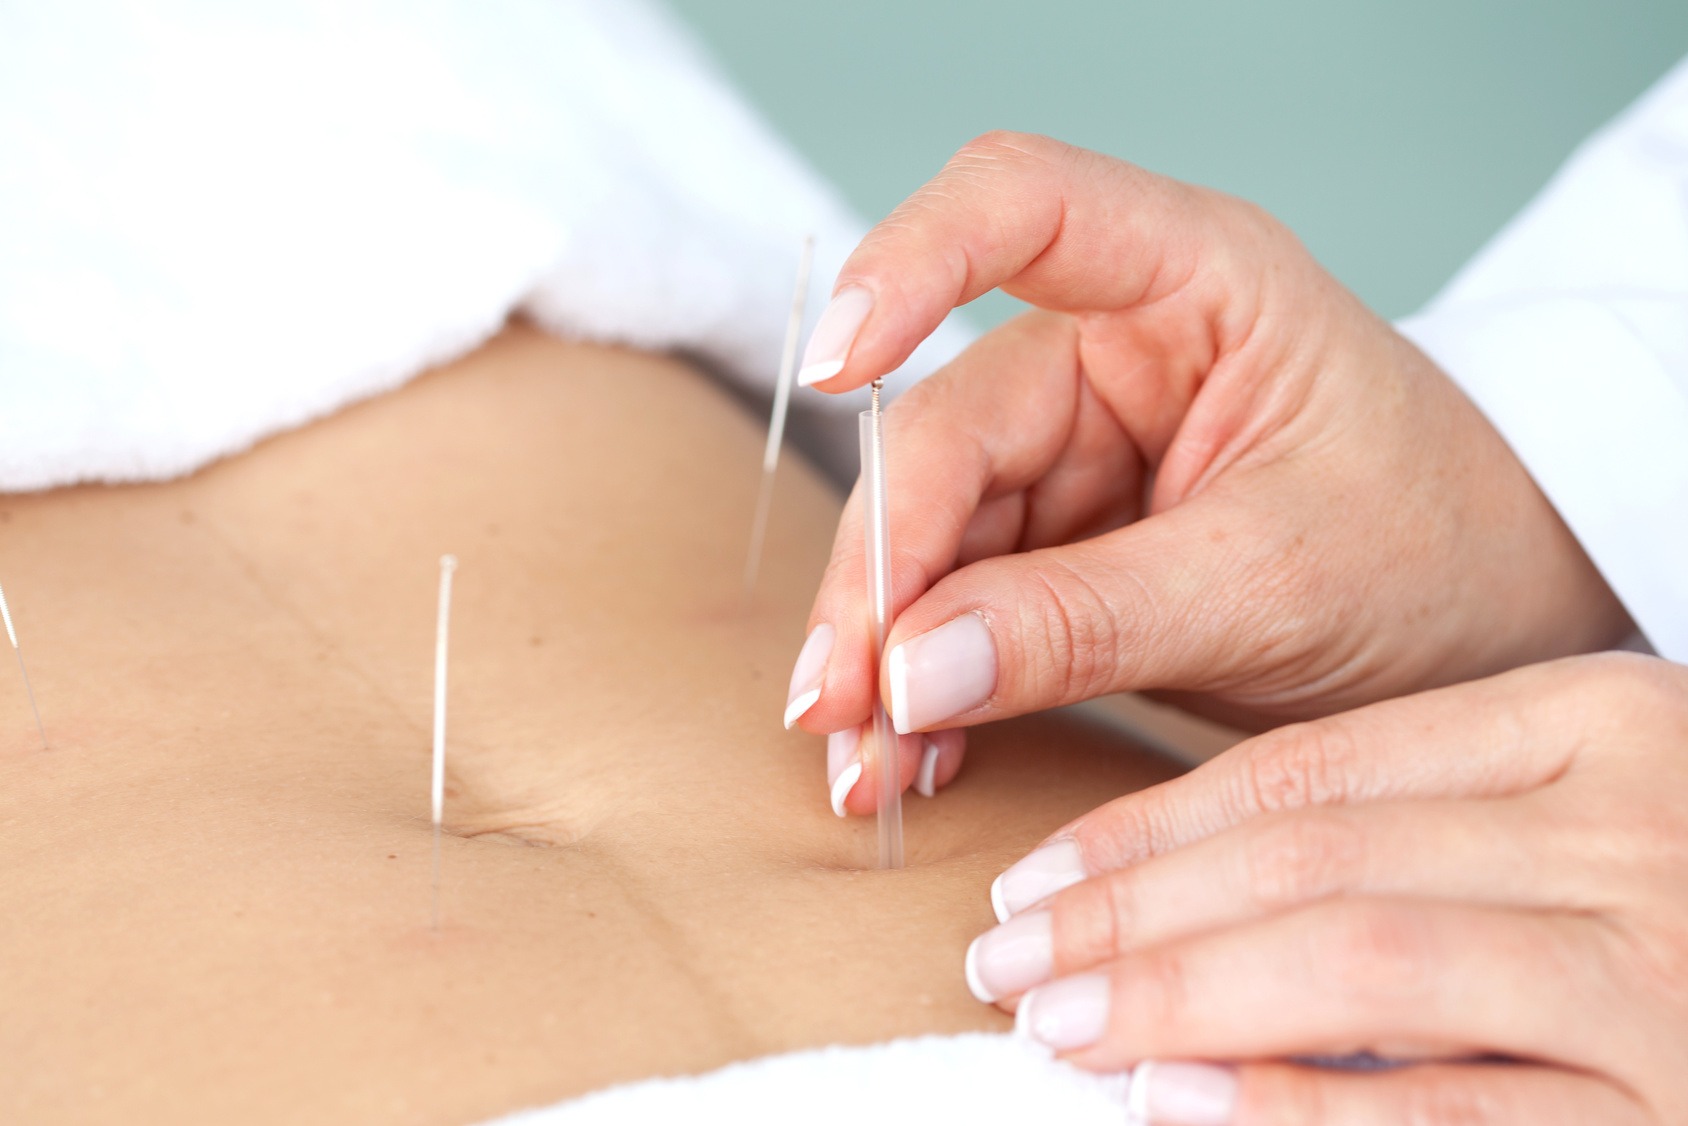 Acupunture and fertility